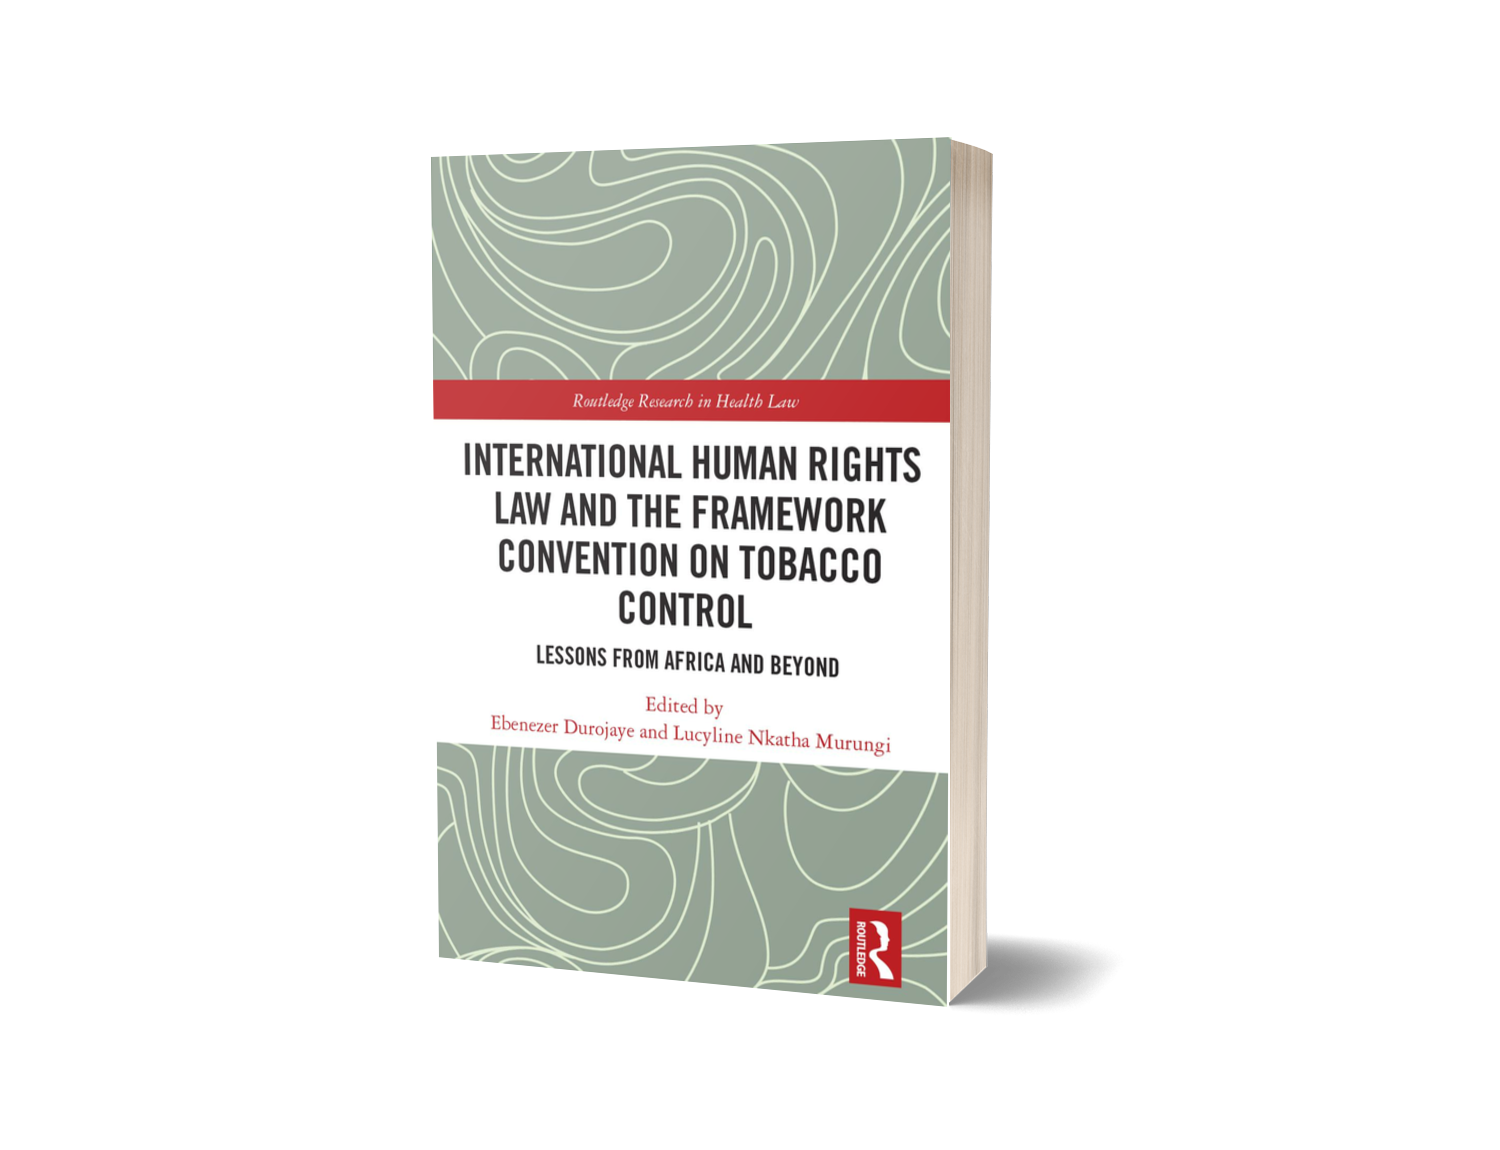 Durojaye, Ebenezer (with Lucyline Murungi) (eds.) International Human Rights Law and the Framework Convention on Tobacco Control: Lessons from Africa and Beyond (Routledge, 2023)